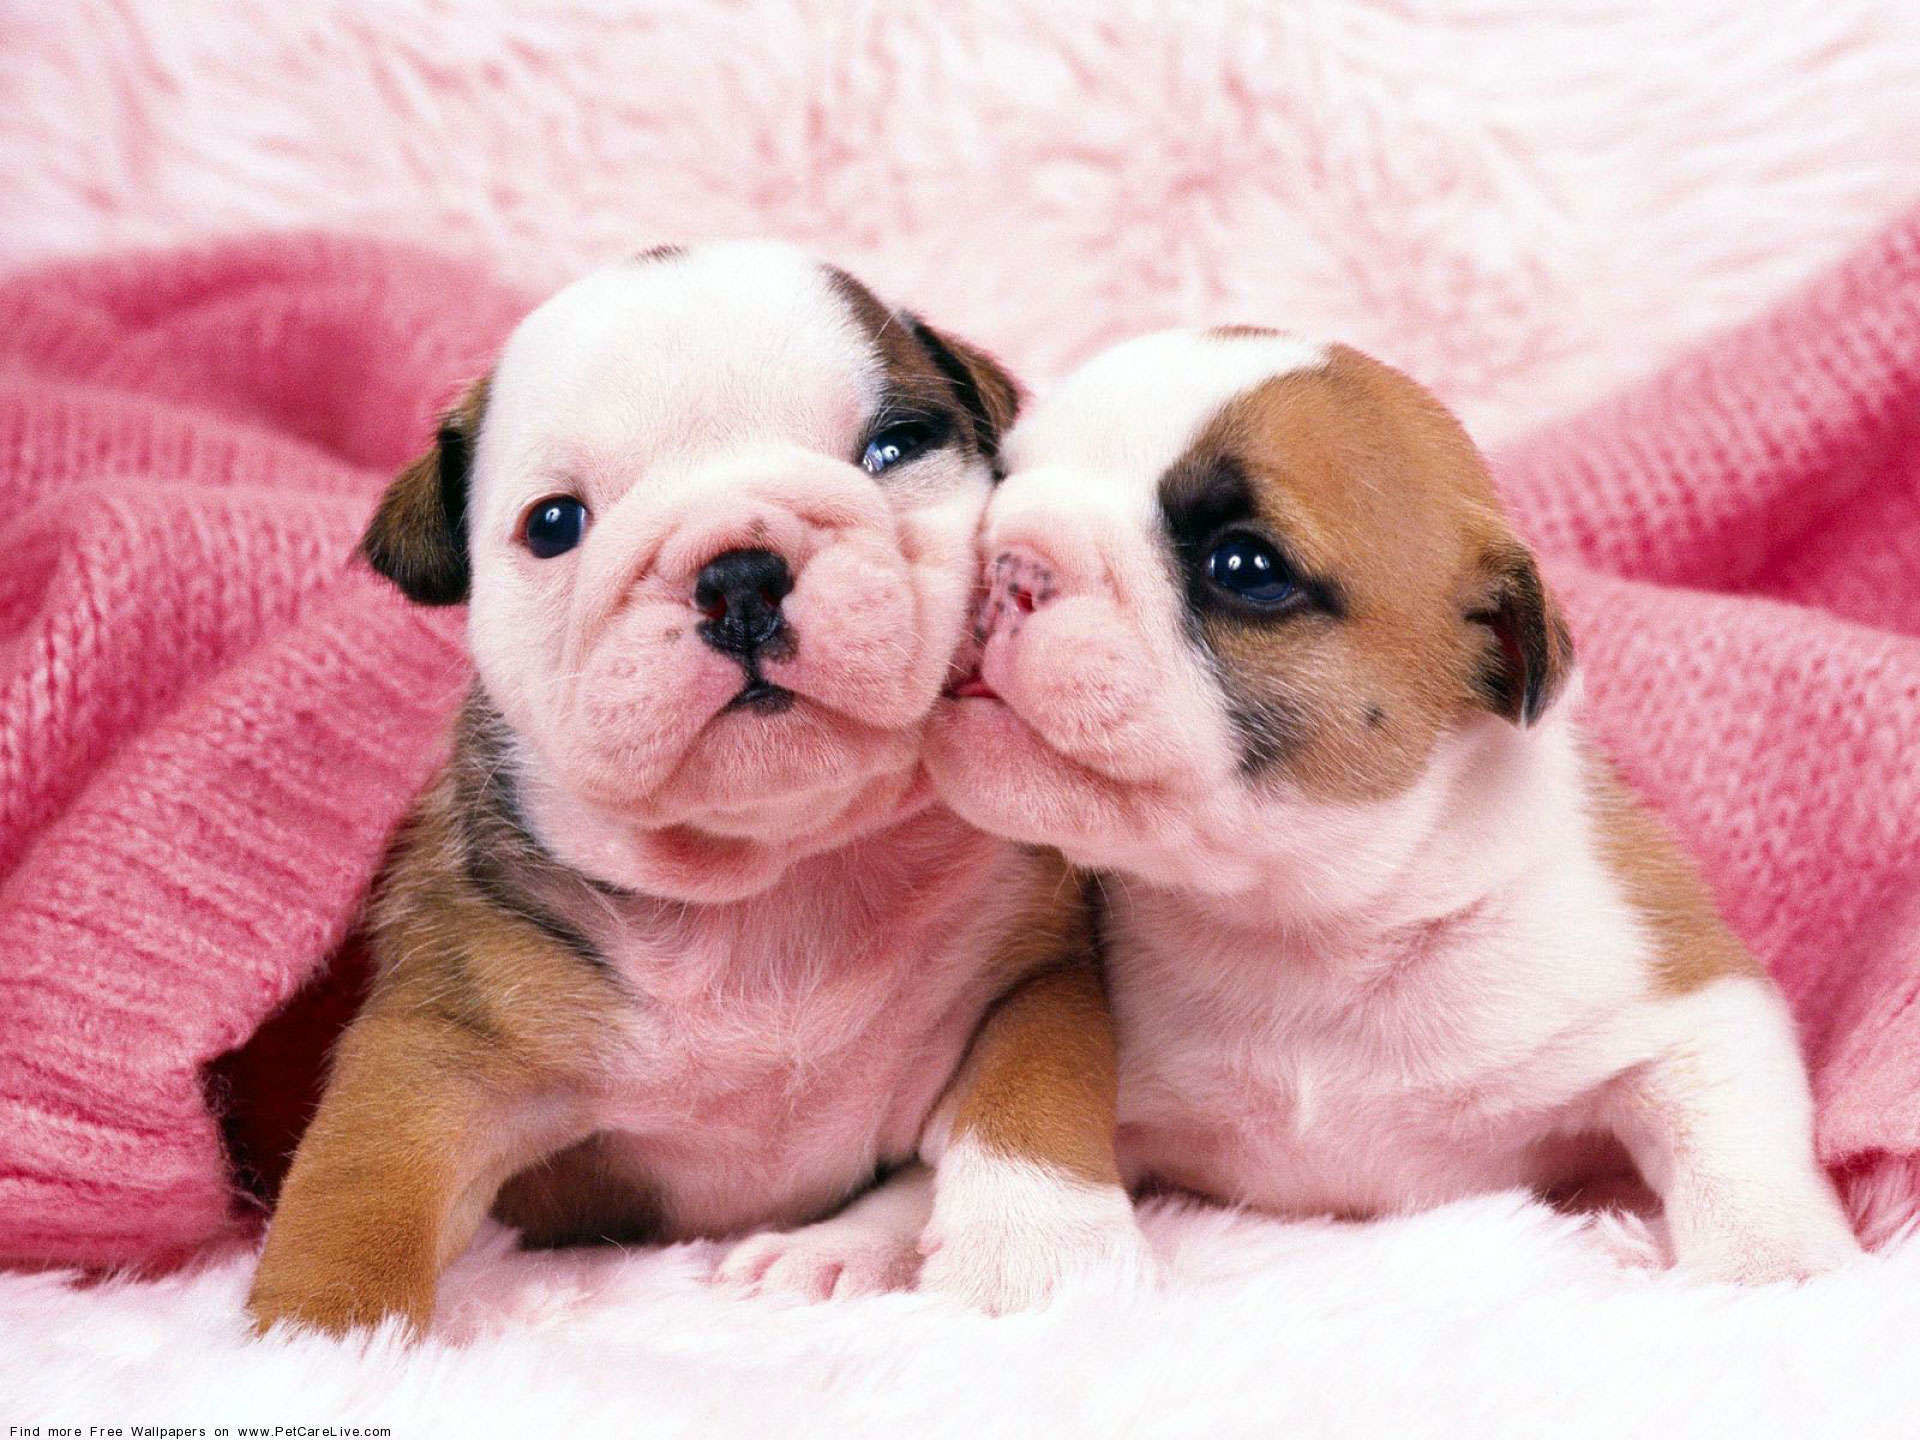 Search Results for “cute english bulldog puppies wallpaper”